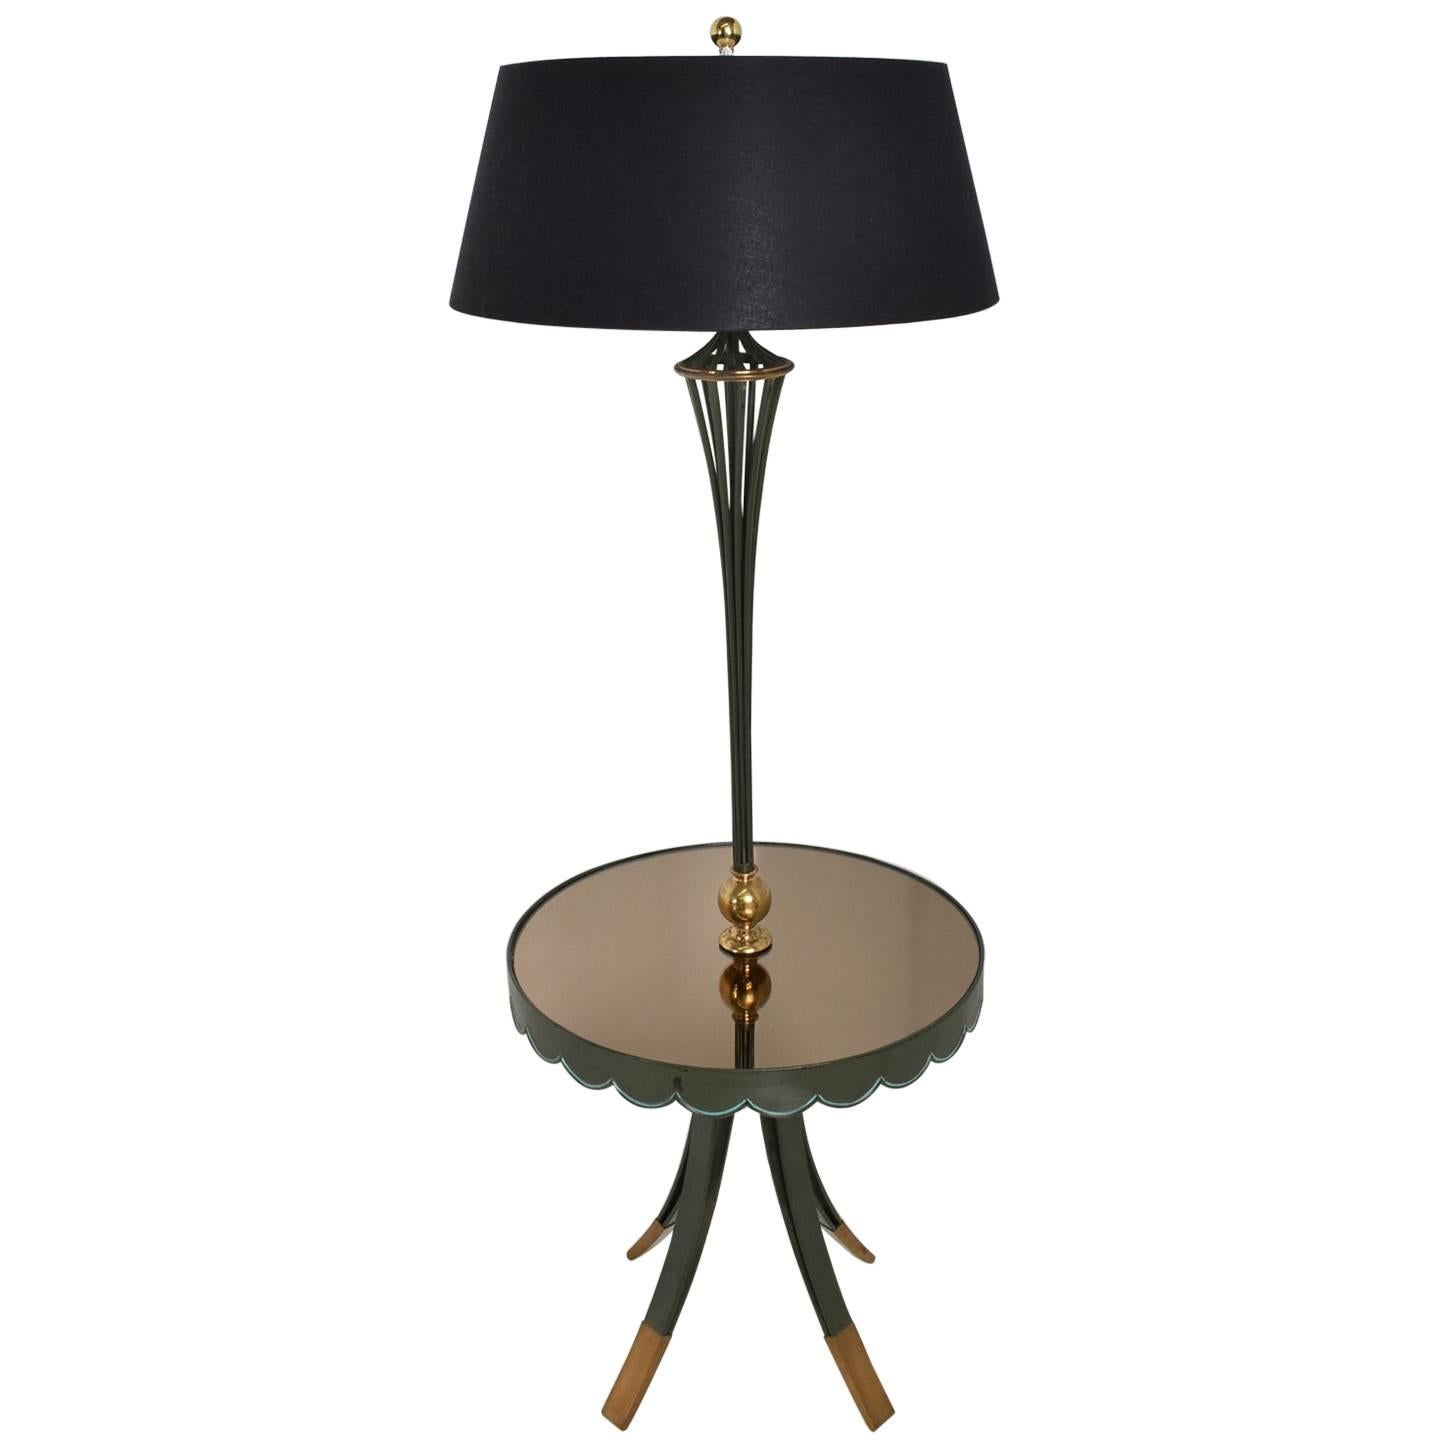 Arturo Pani Refined Elegance Floor Lamp with Scalloped Table Mexico City 1940s